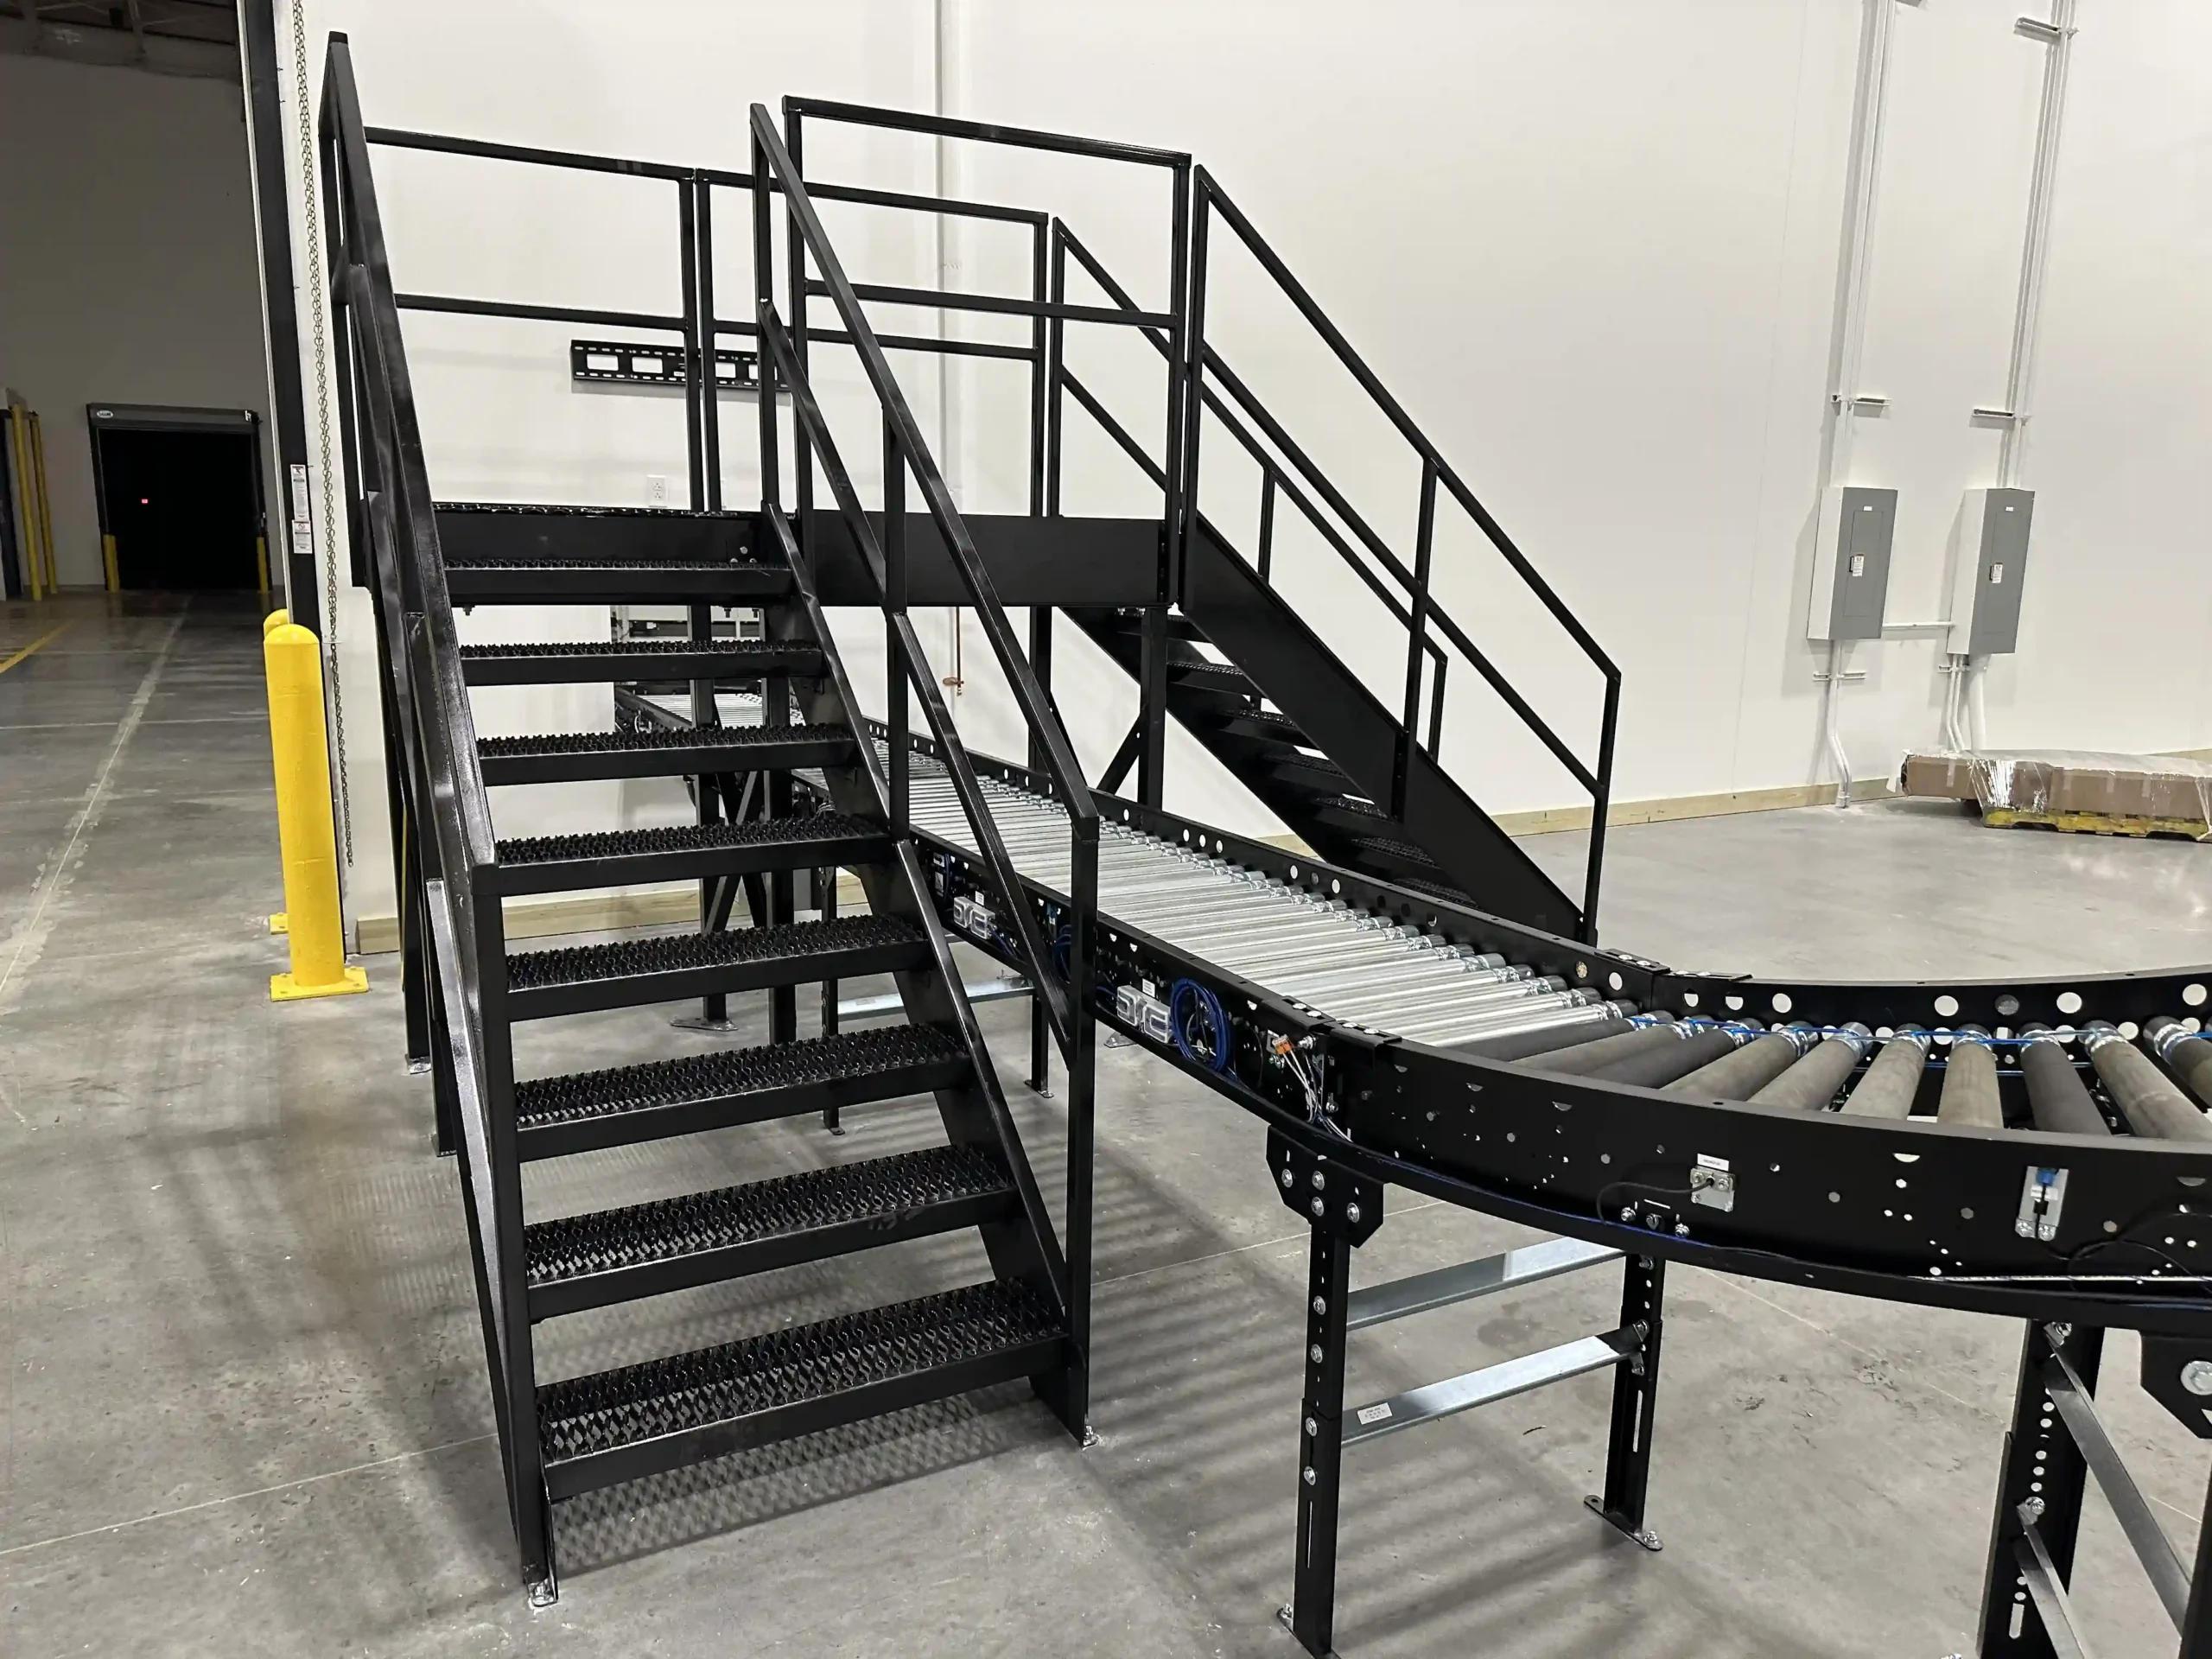 A 3-foot high conveyor with stairs leading up to a crossover 5 feet above the conveyor and another set of stairs on the opposite side of the convey leading down.